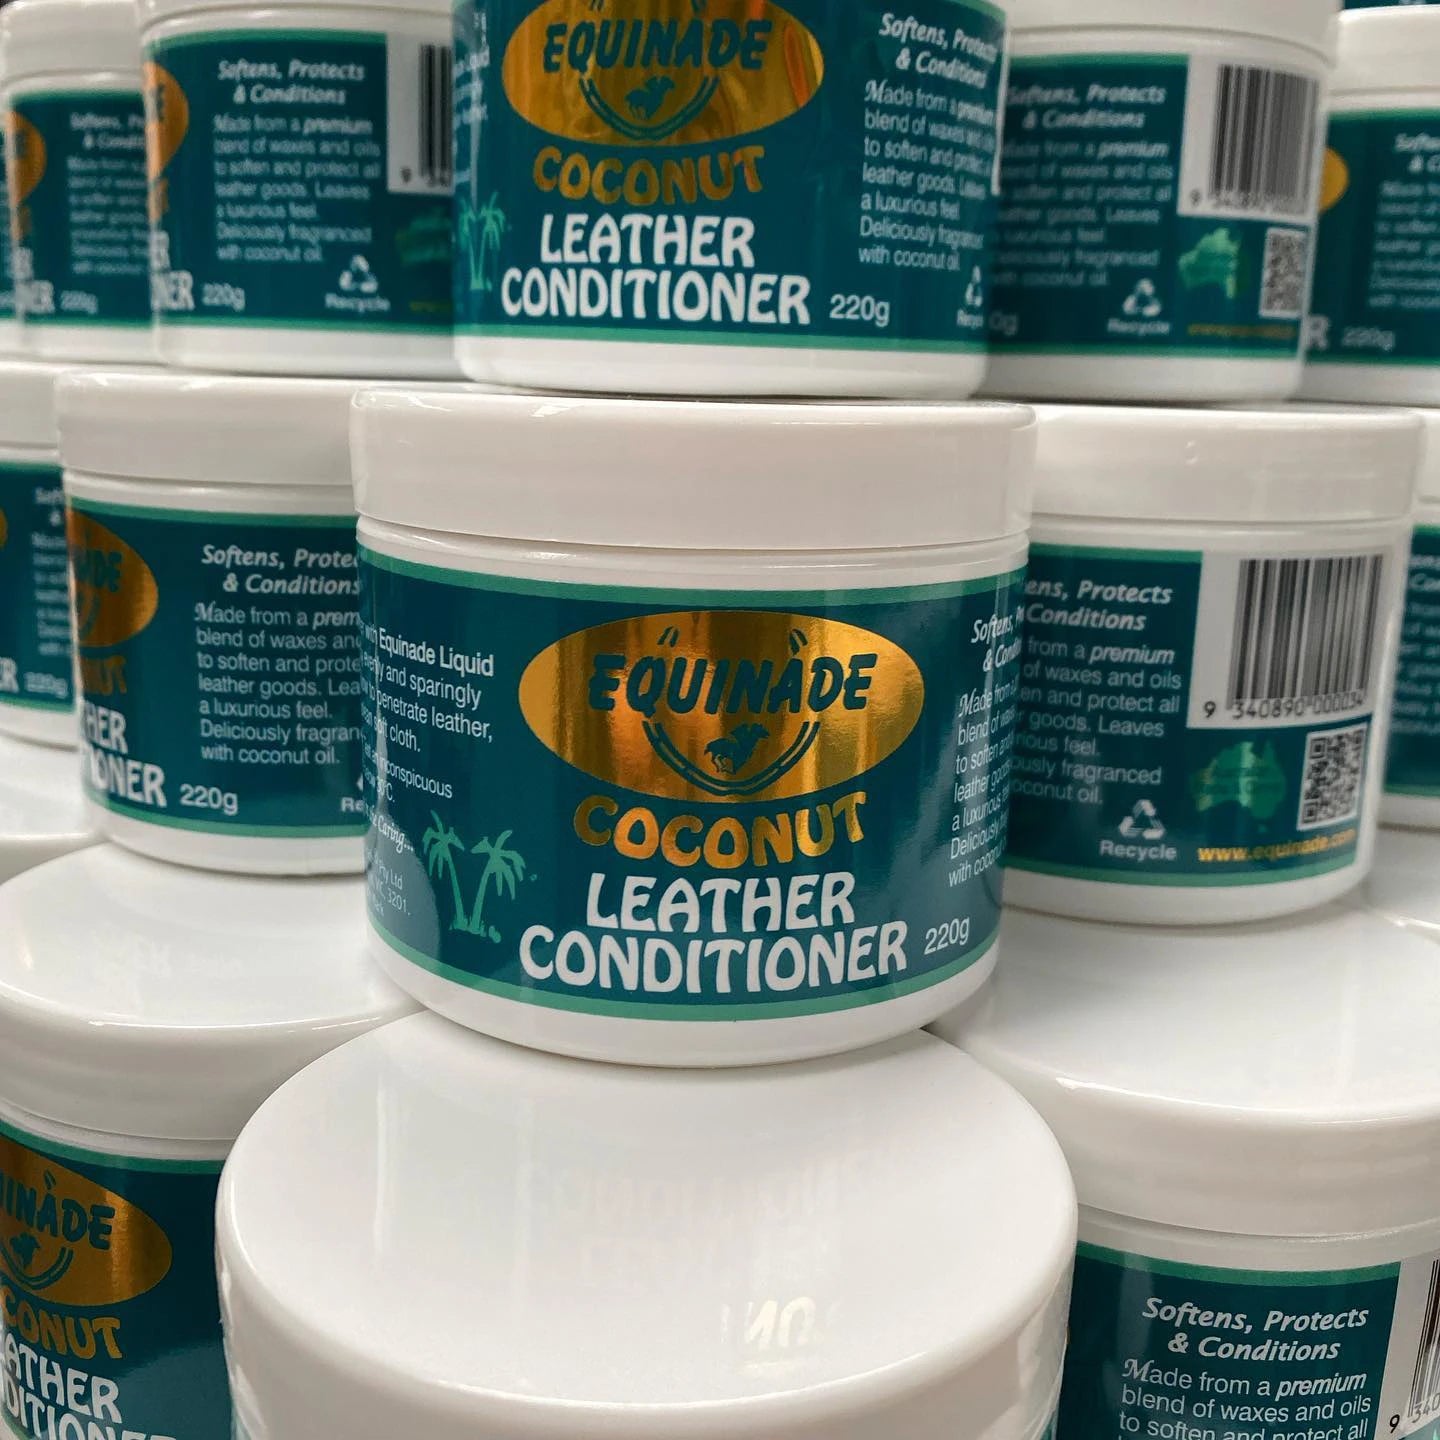 Equinade-Coconut-Leather-Conditioner-220g.webp